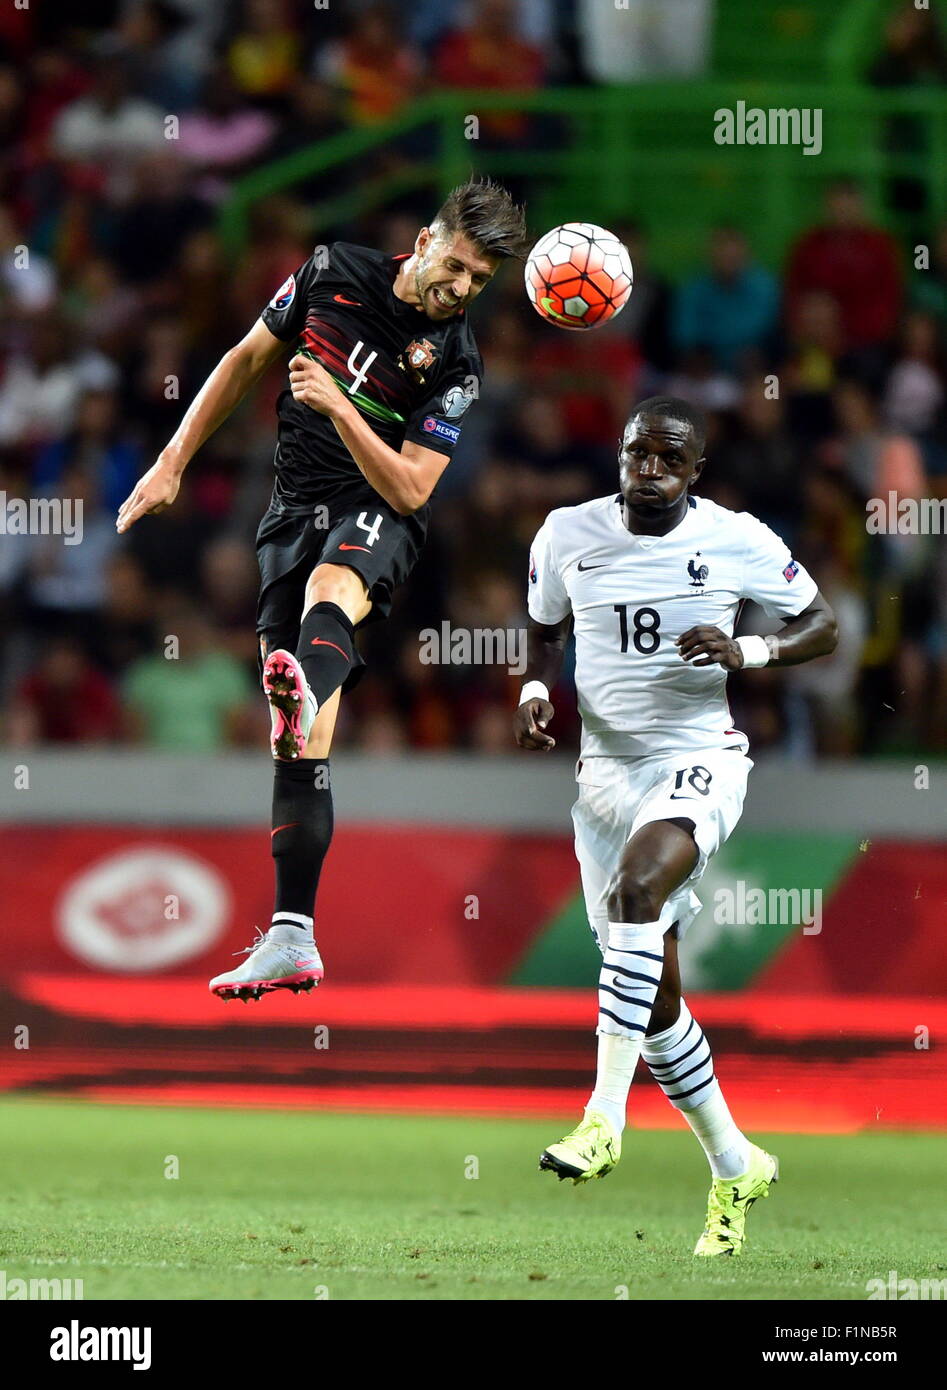 Lisbon, Portugal. 4th Sep, 2015. Miguel Veloso (L) of Portugal jumps for the ball during the Euro 2016 friendly football match against France in Lisbon, Portugal, Sept. 4, 2015. Portugal lost the match 0-1. Credit:  Zhang Liyun/Xinhua/Alamy Live News Stock Photo